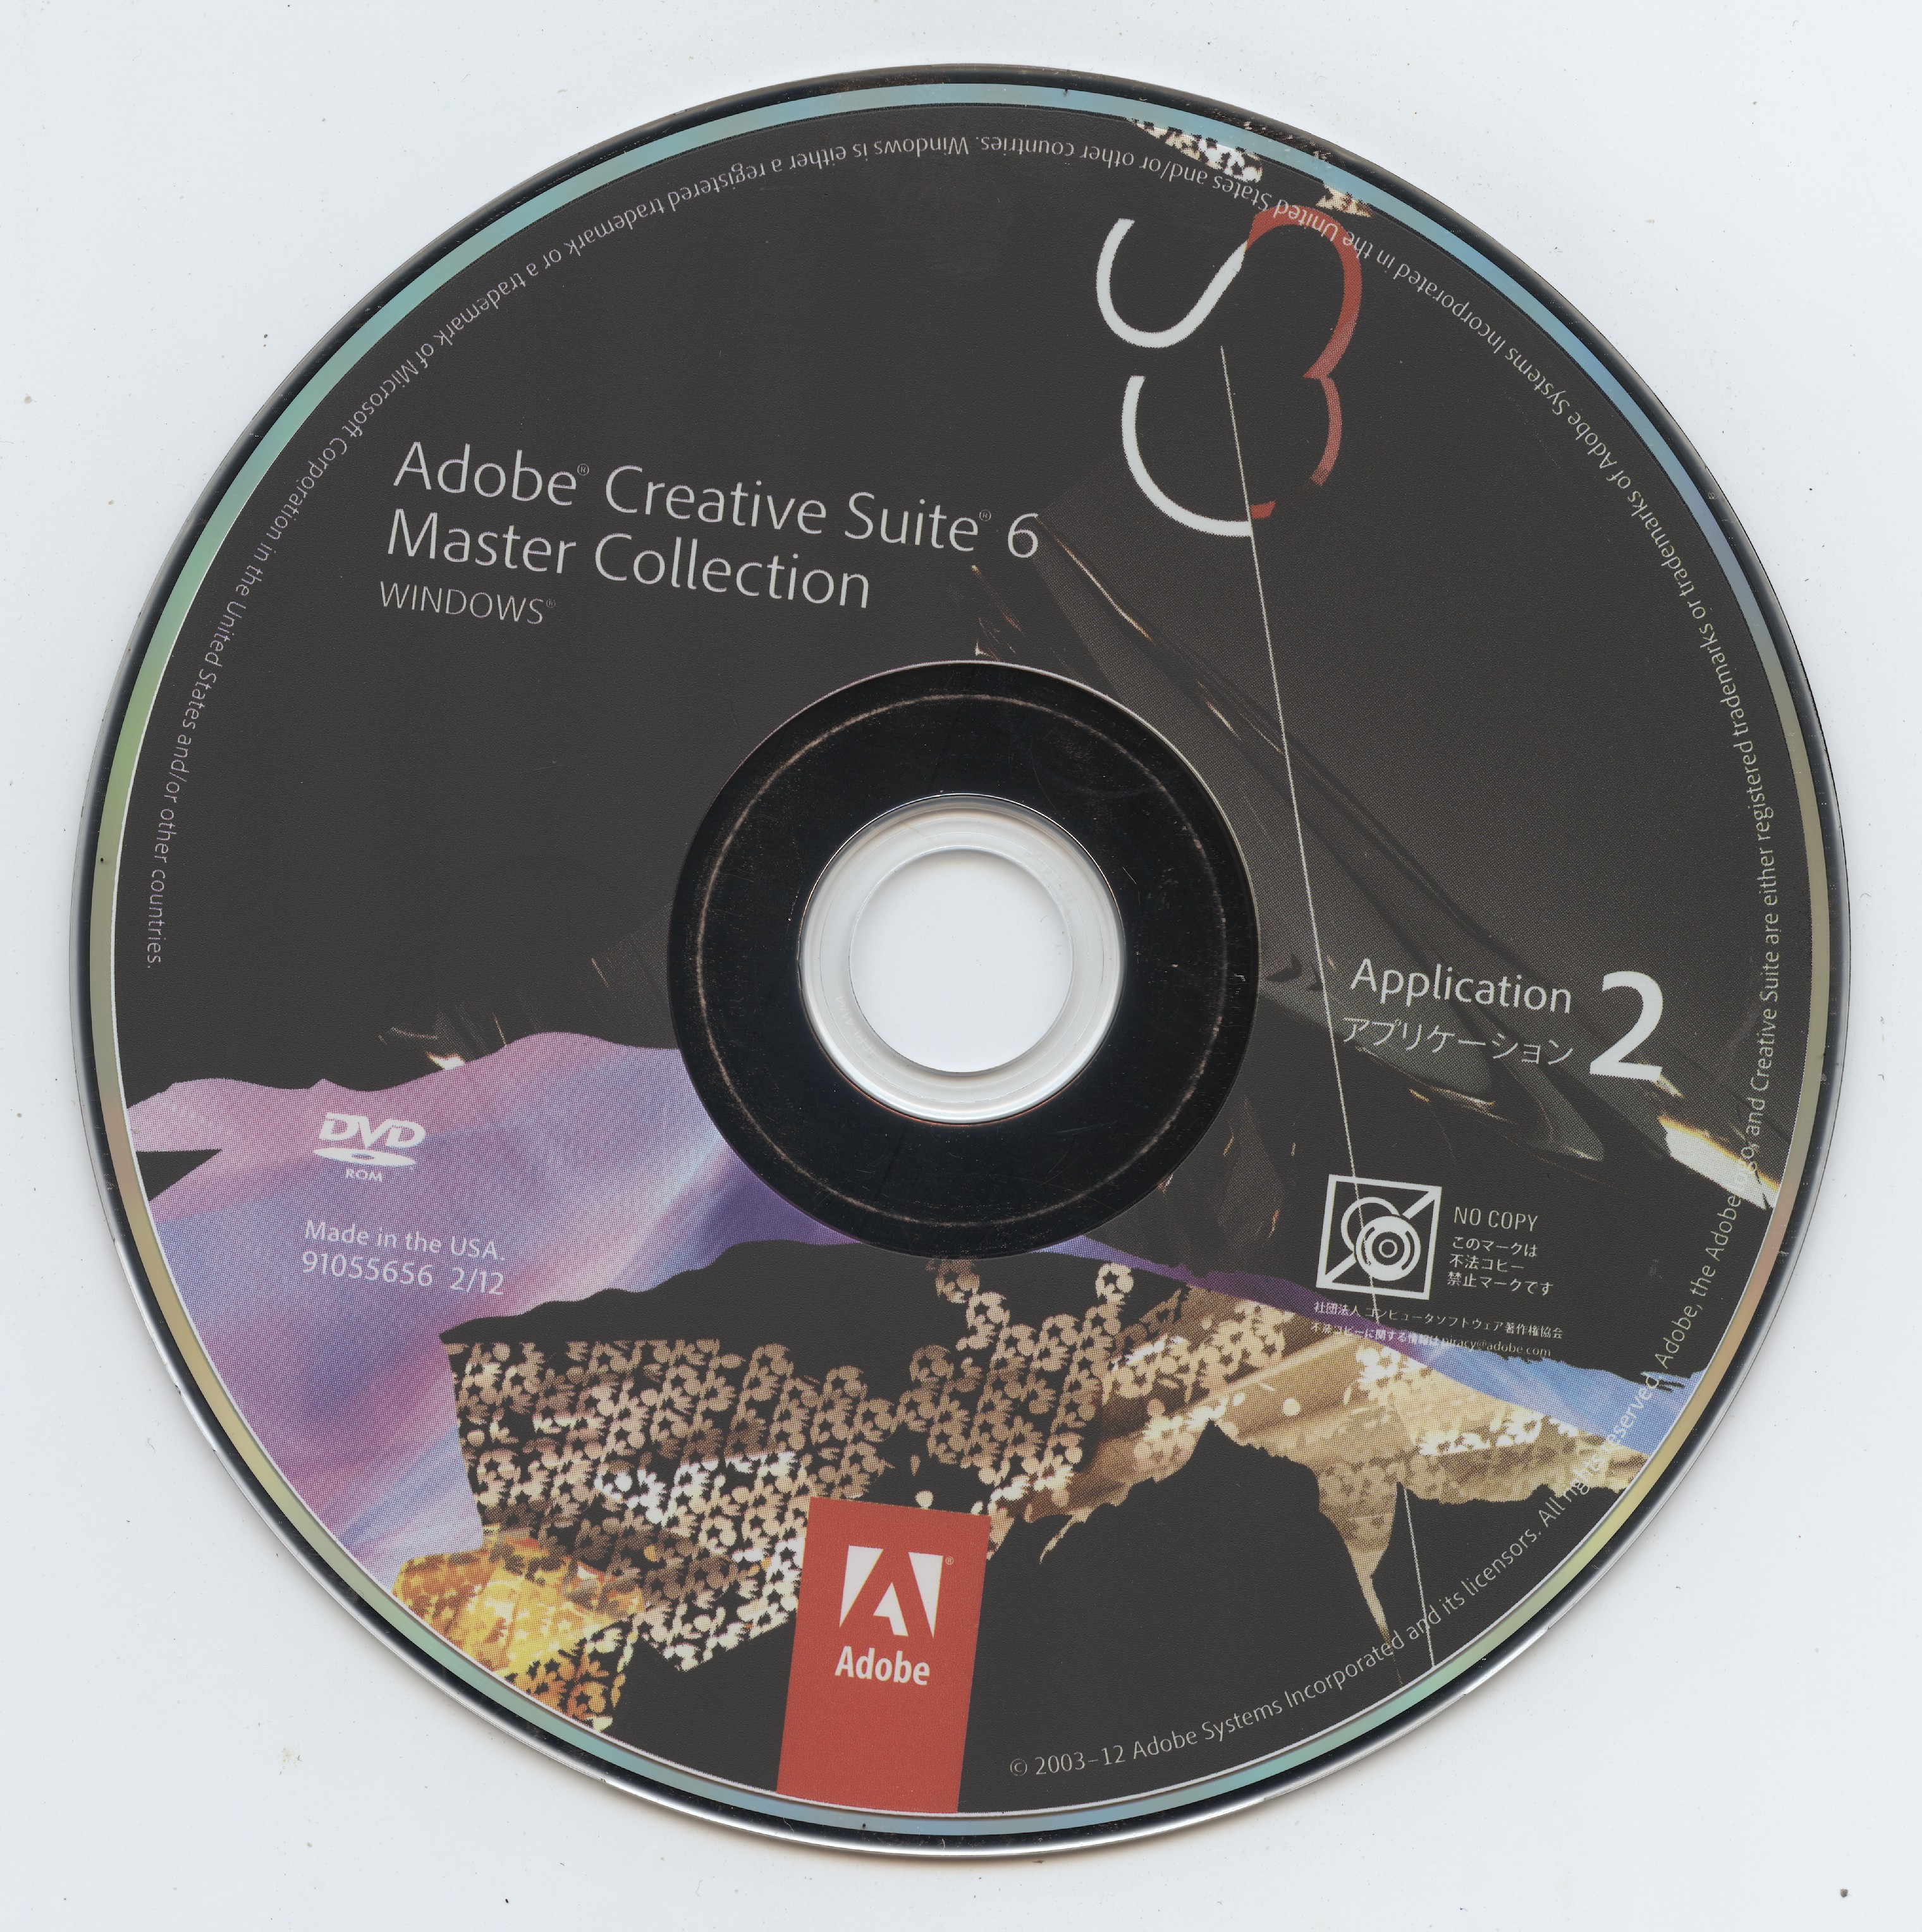 Adobe Creative Suite 6 Master Collection for Windows (Application 